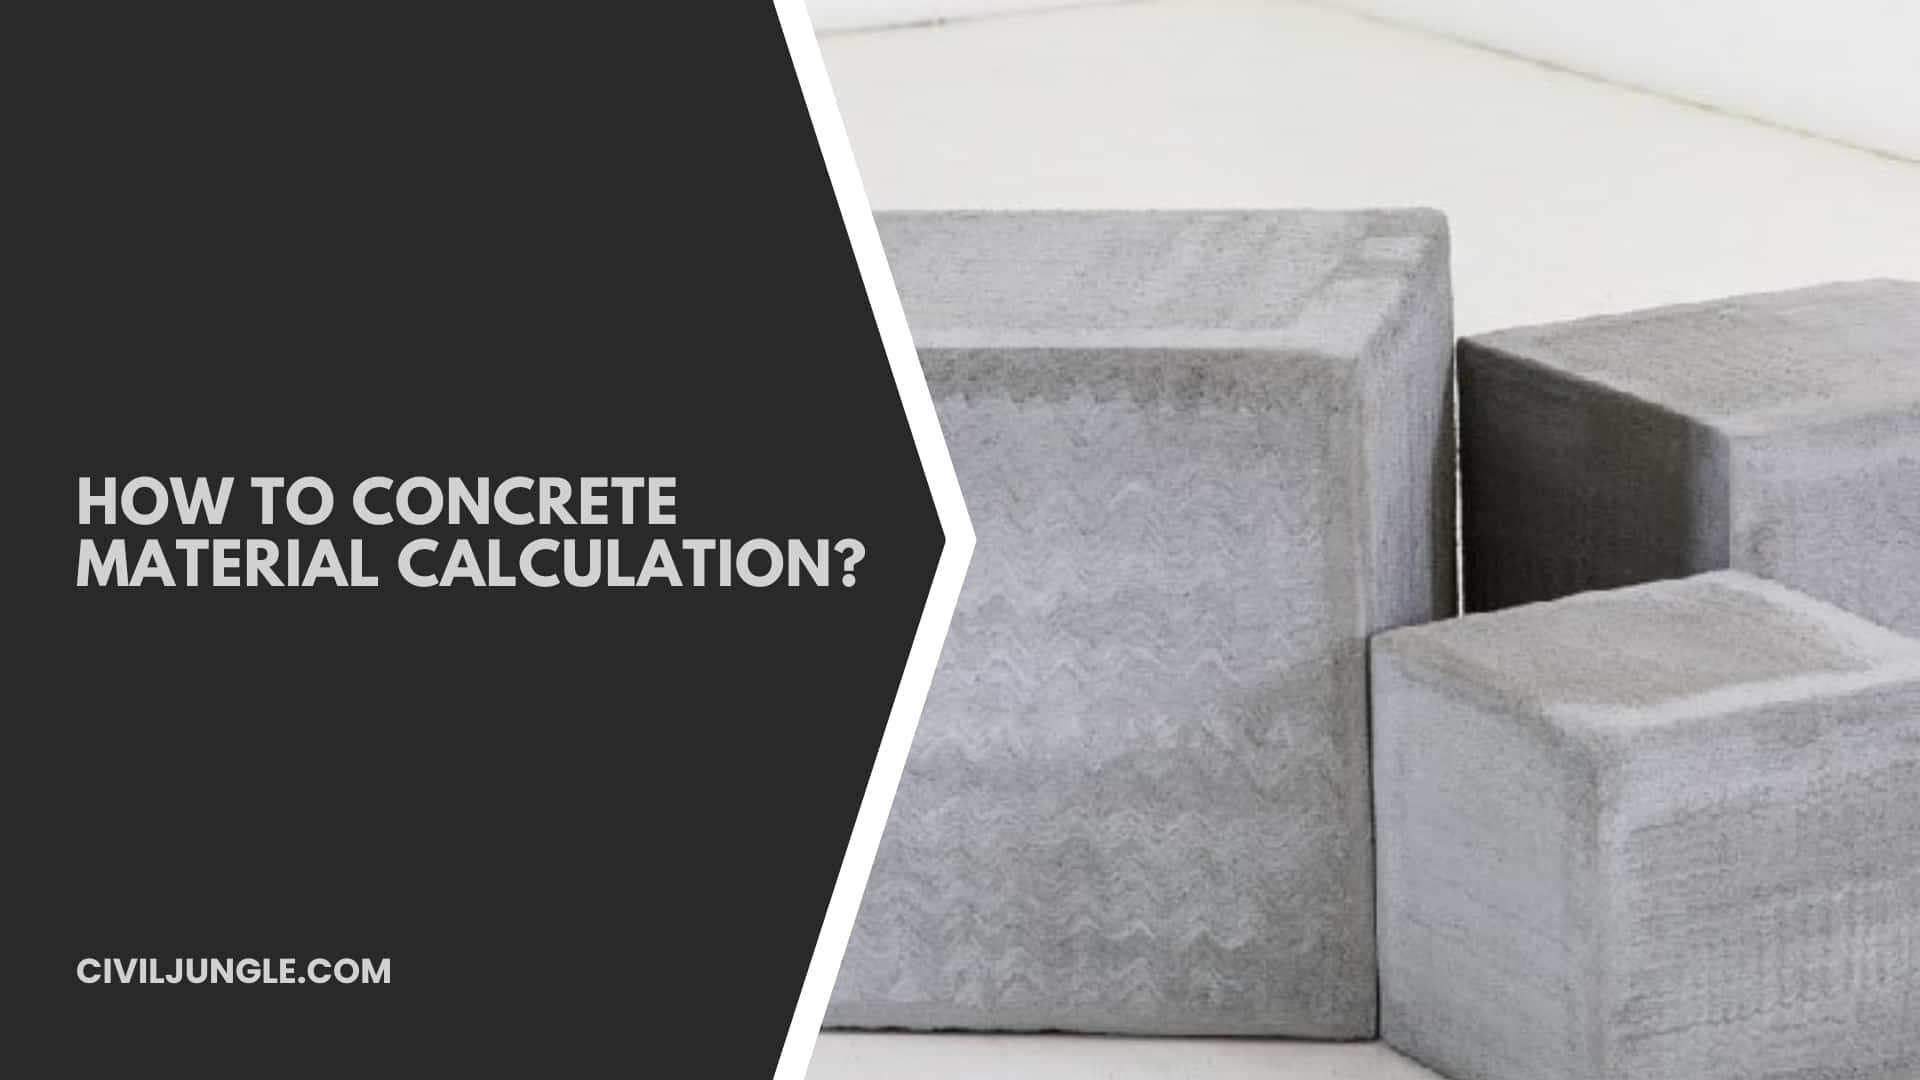 How to Concrete Material Calculation?